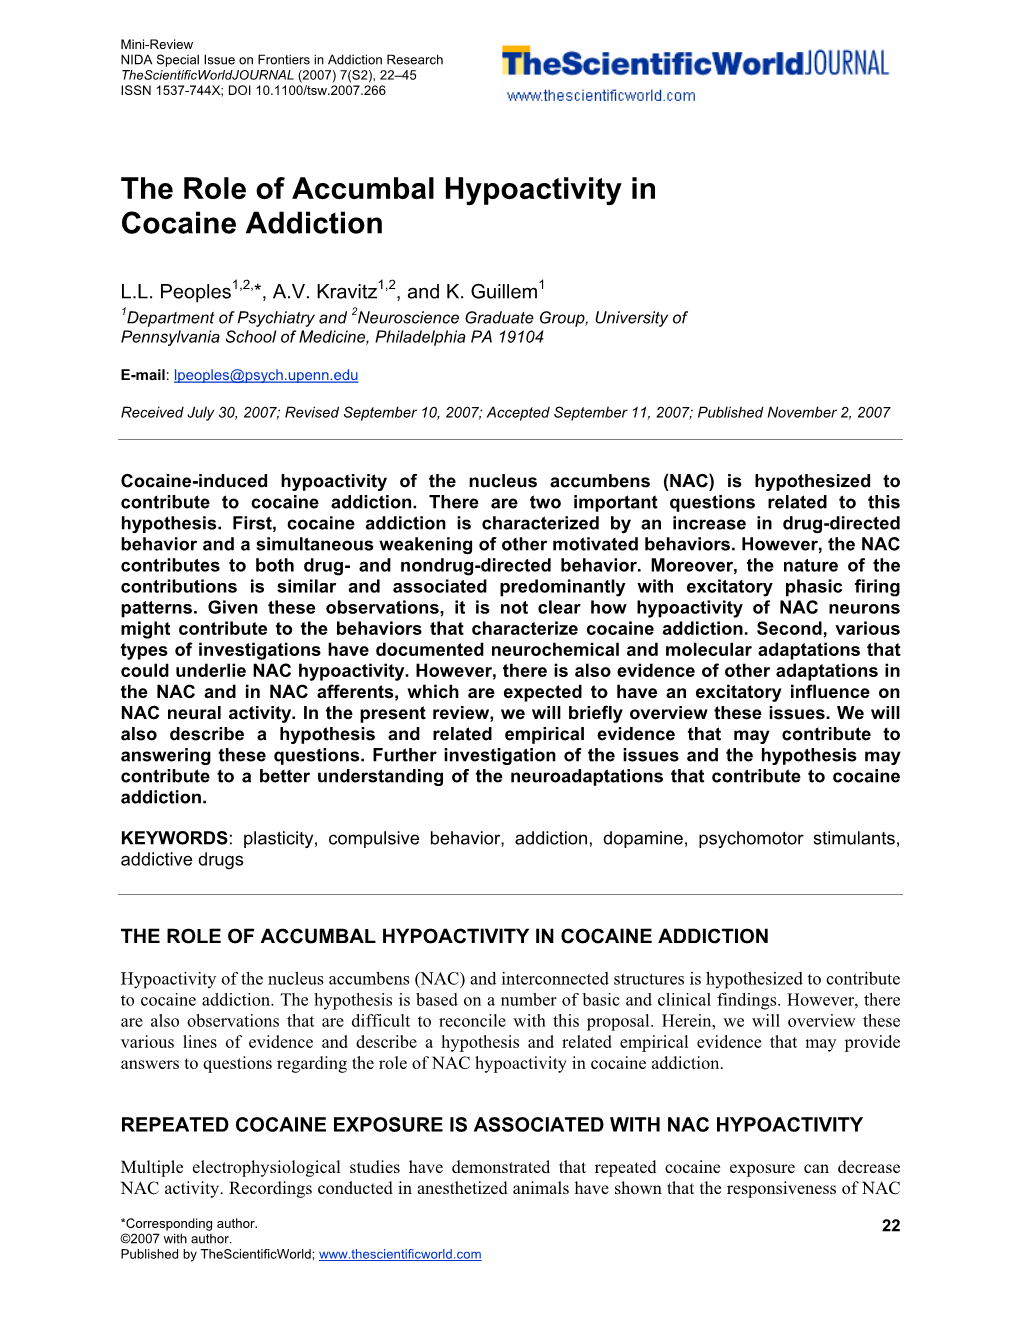 The Role of Accumbal Hypoactivity in Cocaine Addiction